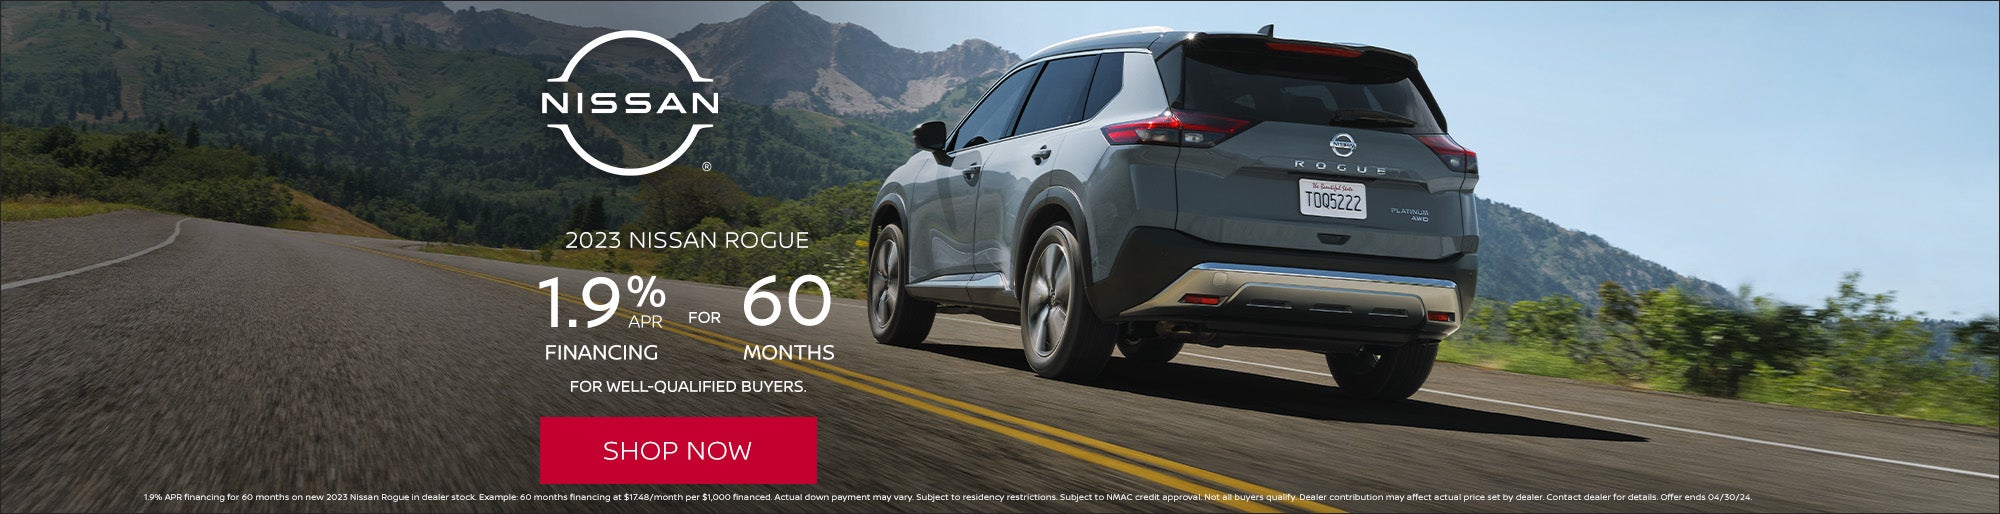 2023 Nissan Rogue for 1.9% for 60 months!